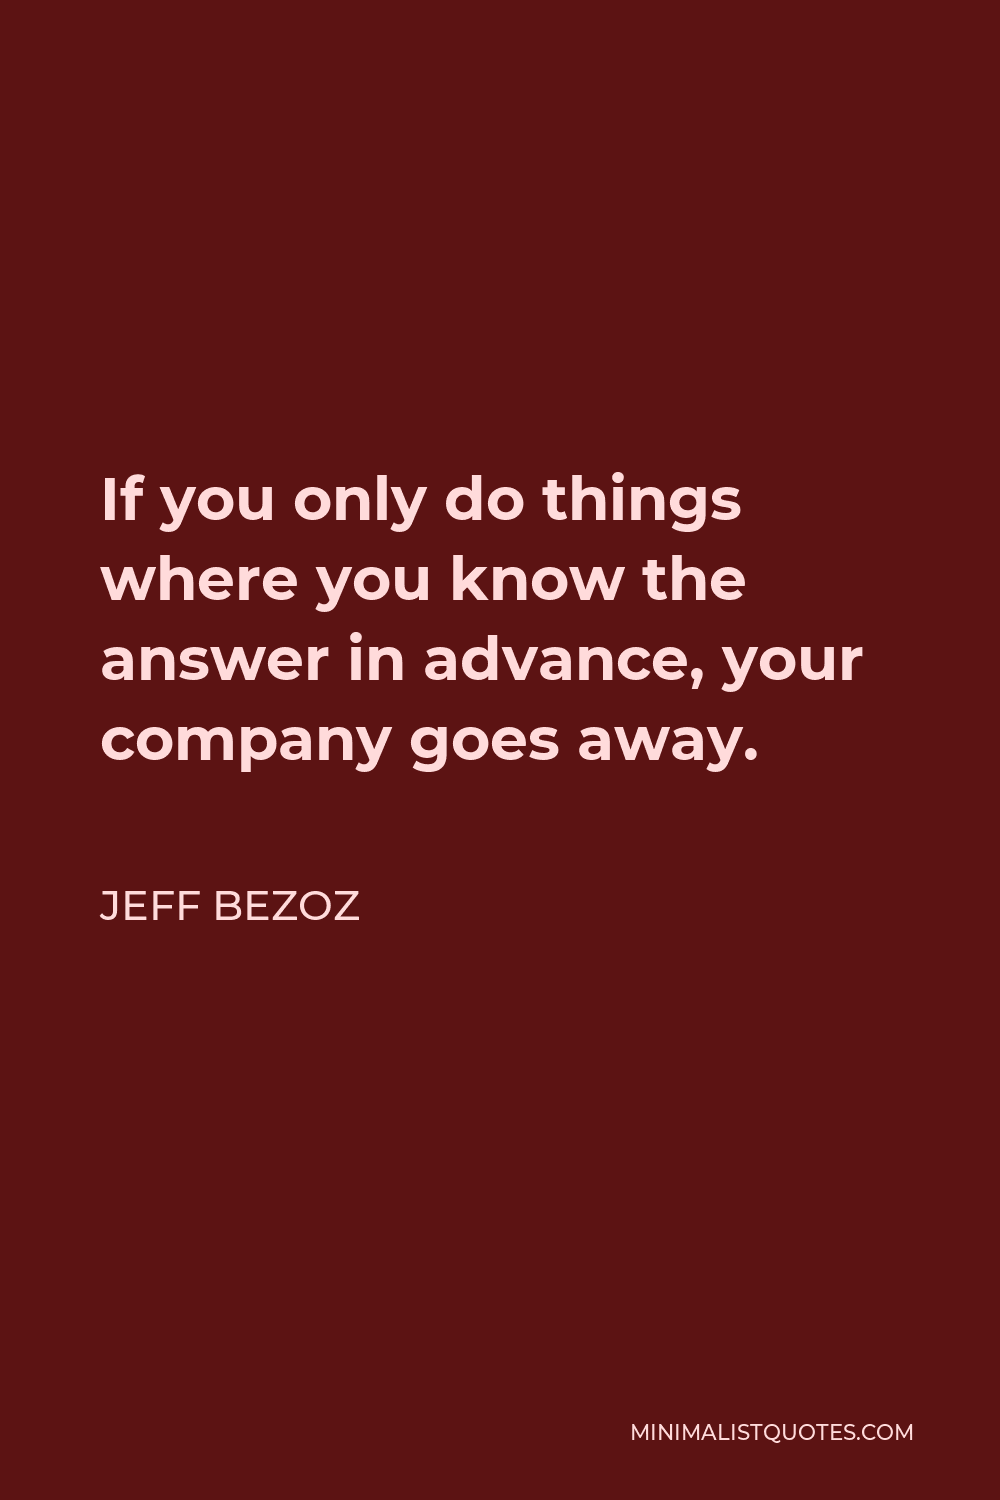 Jeff Bezoz Quote - If you only do things where you know the answer in advance, your company goes away.